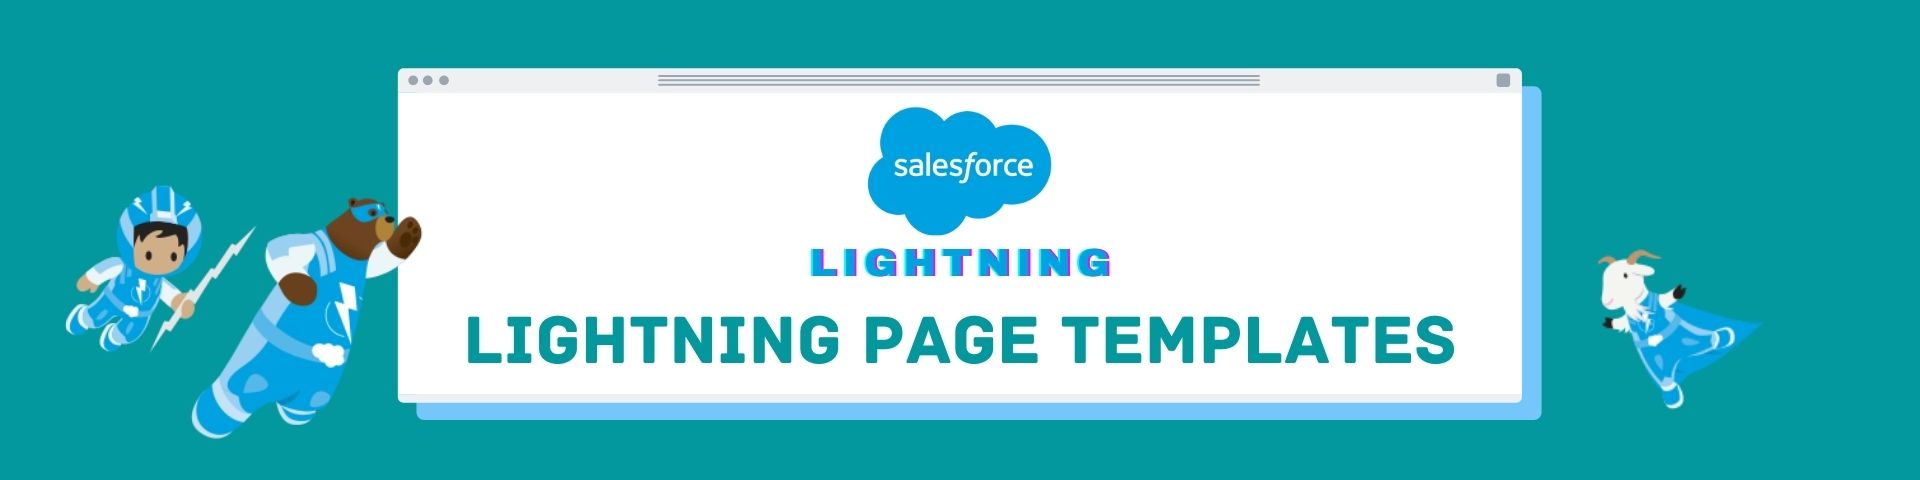 Salesforce Lightning Page template